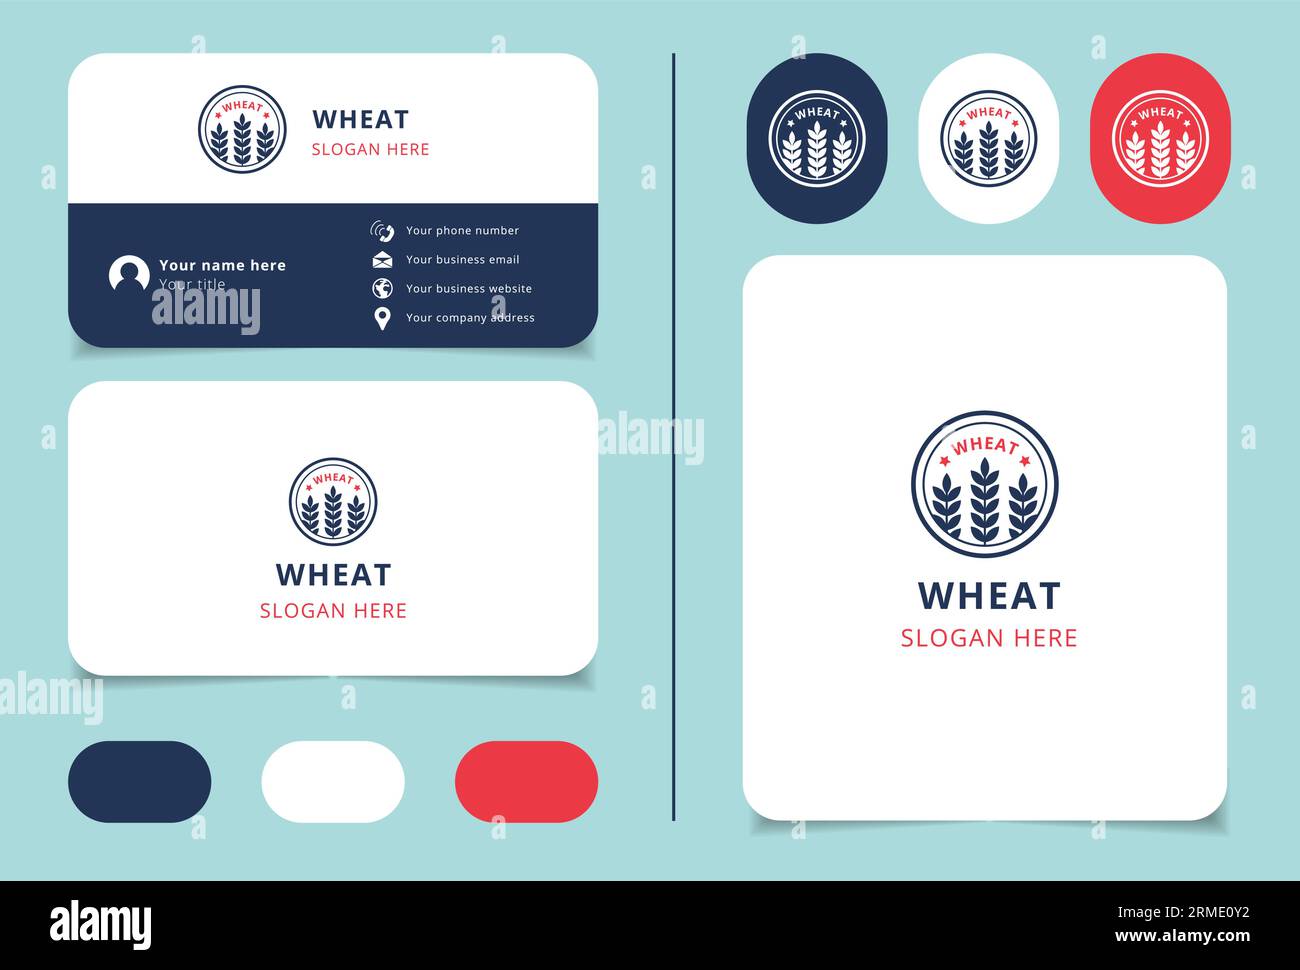 Wheat logo design with editable slogan. Branding book and business card template. Stock Vector